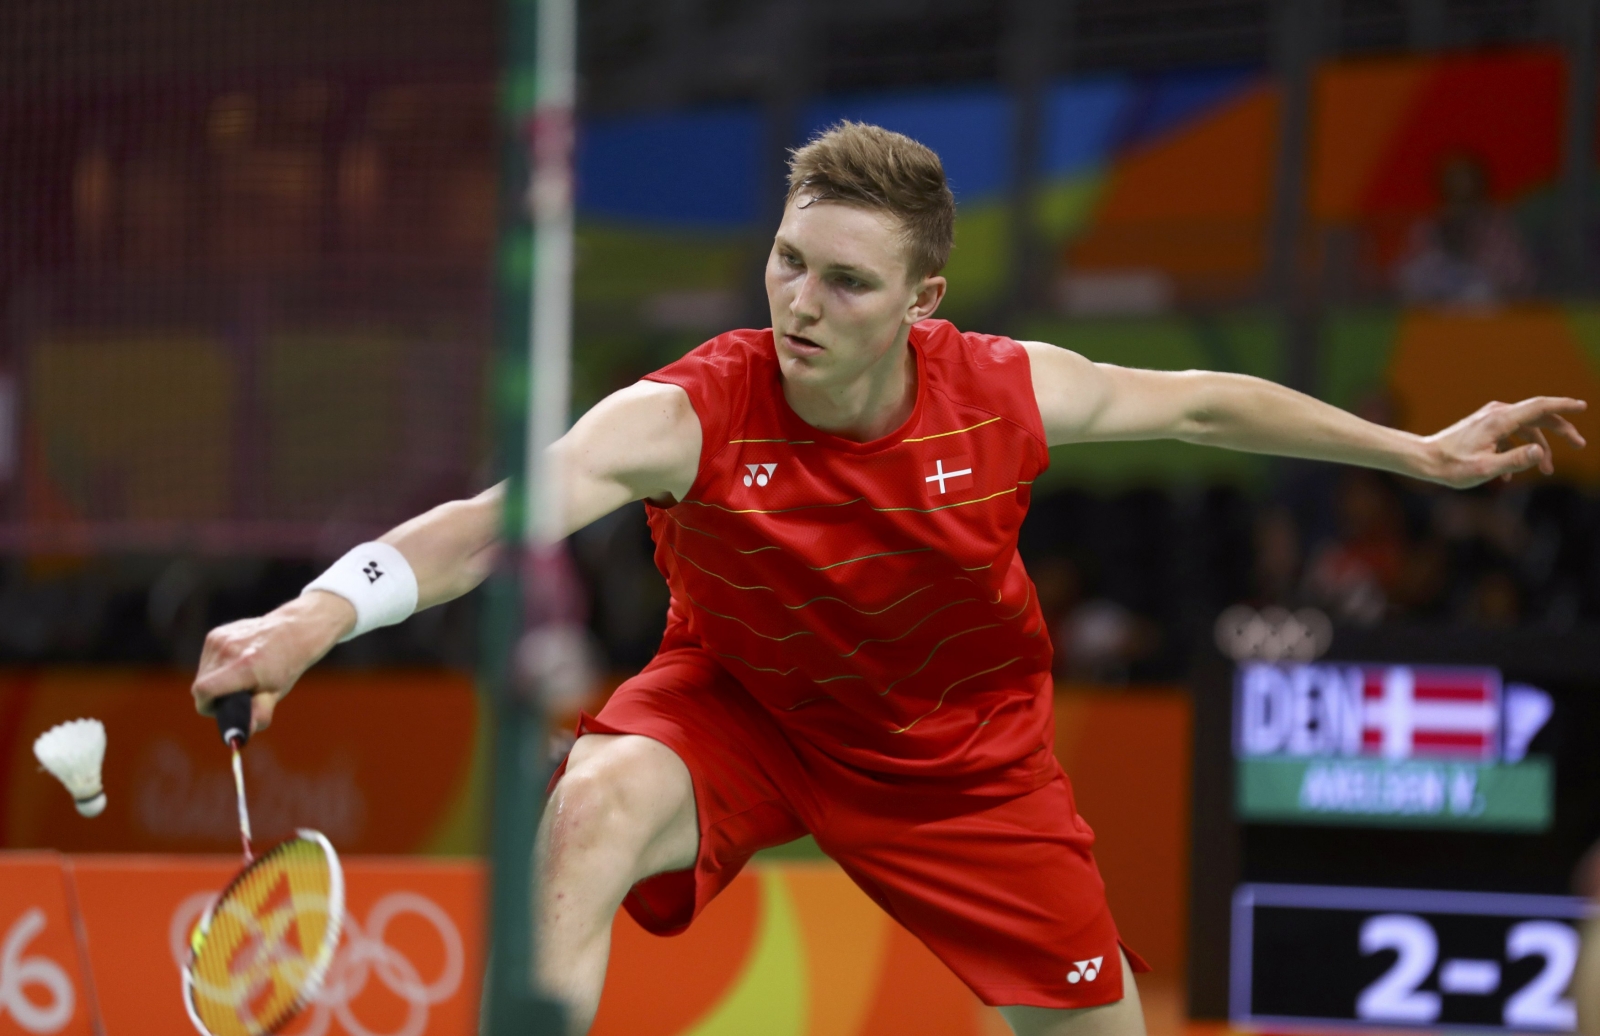 Viktor Axelsen vs Chen Long, semi-final How to watch live on TV, online, mobile in the UK, abroad IBTimes UK